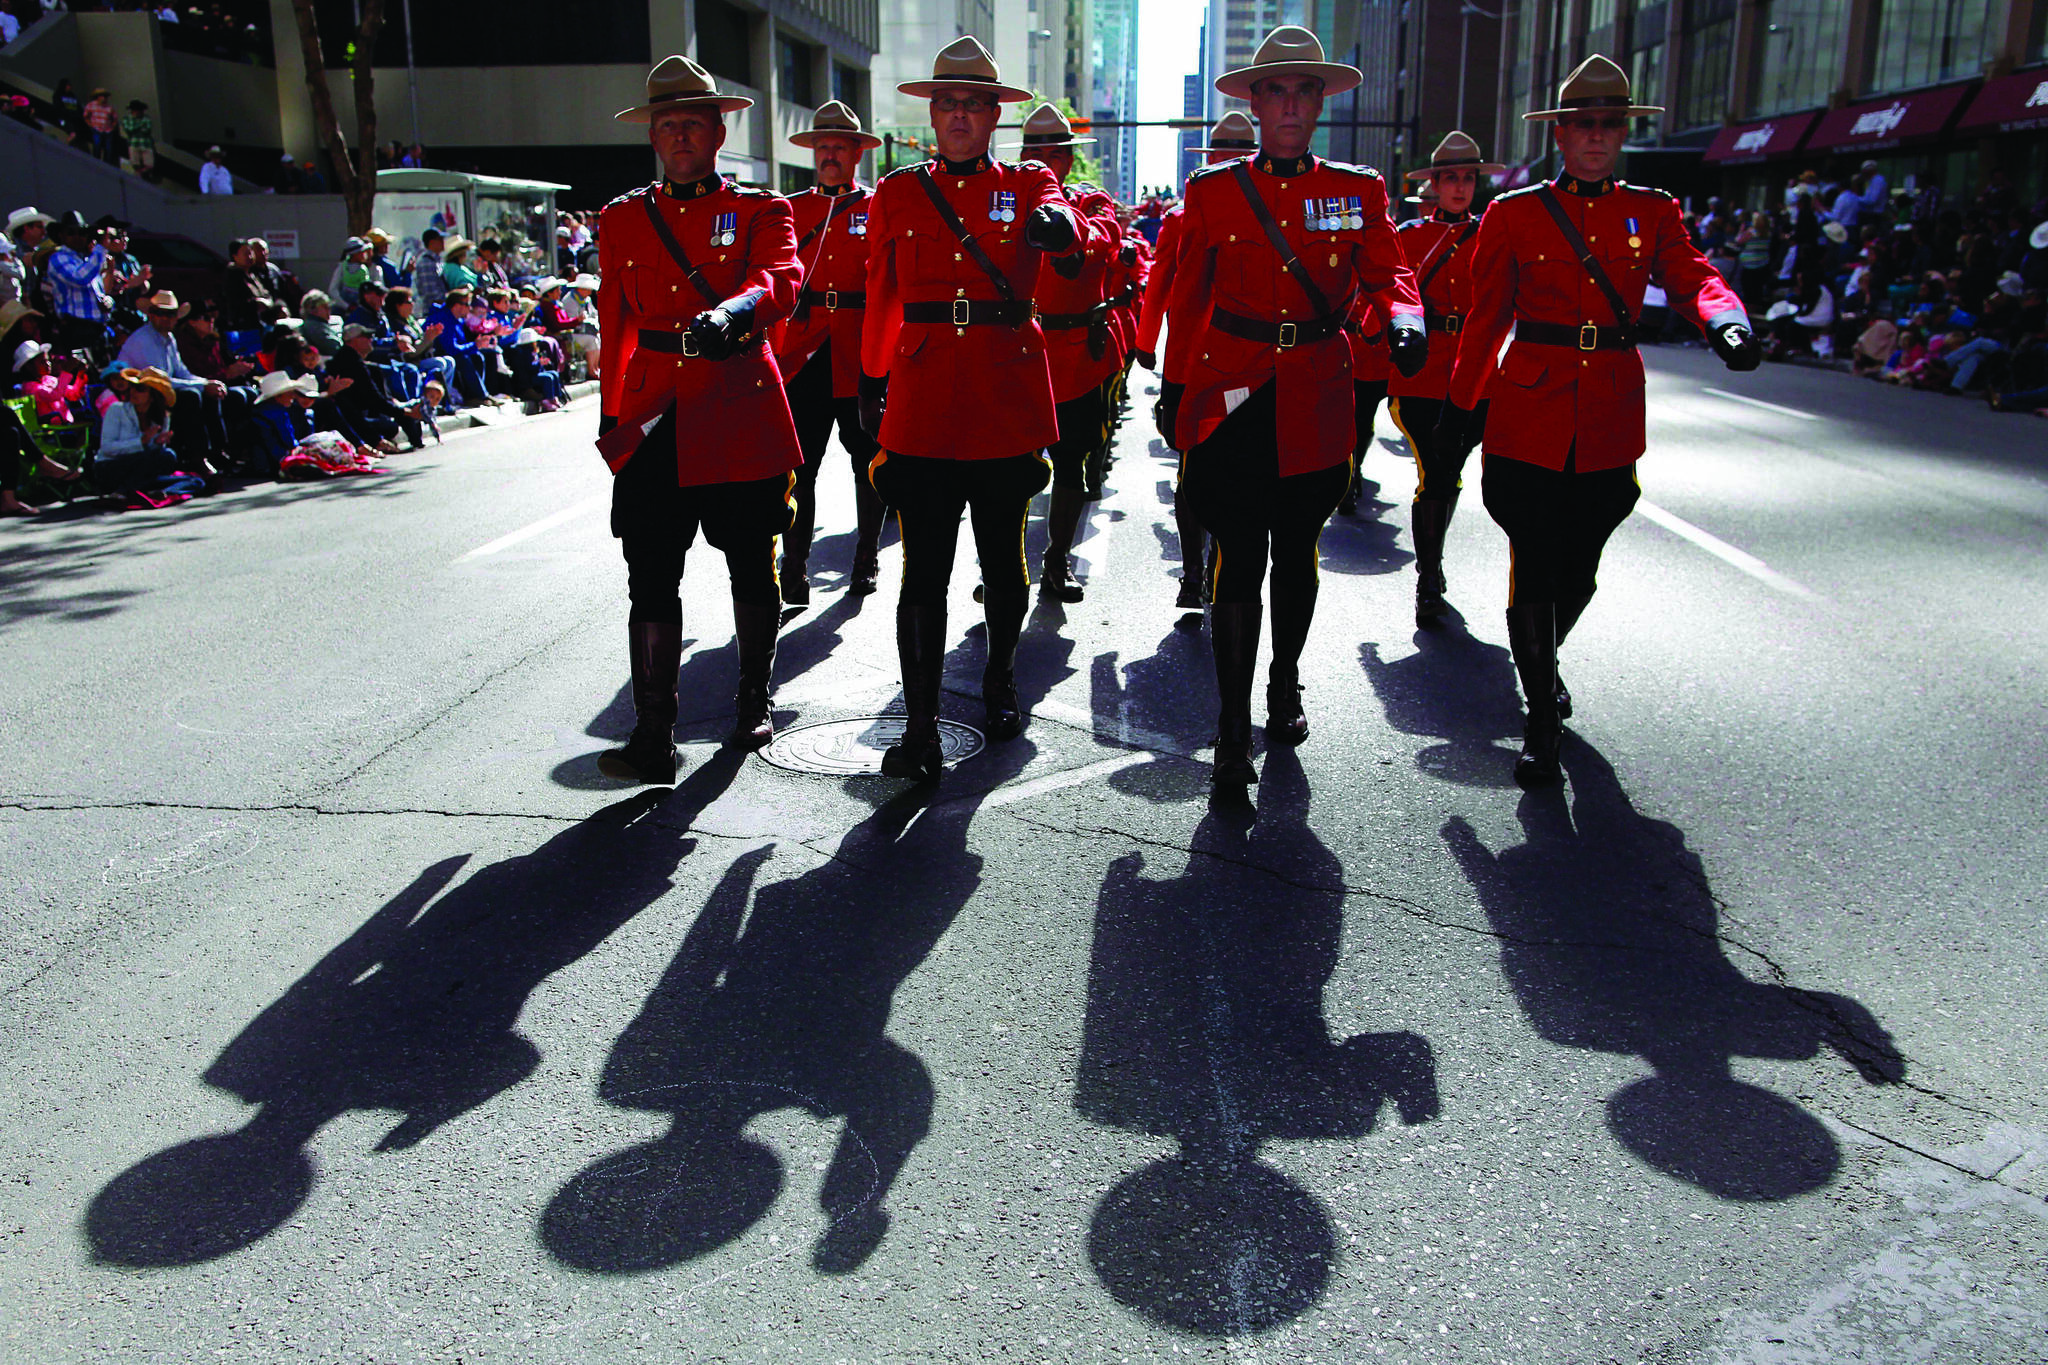 Members of the RCMP march during the Calgary Stampede parade in Calgary, Friday, July 5, 2013. THE CANADIAN PRESS/Jeff McIntosh